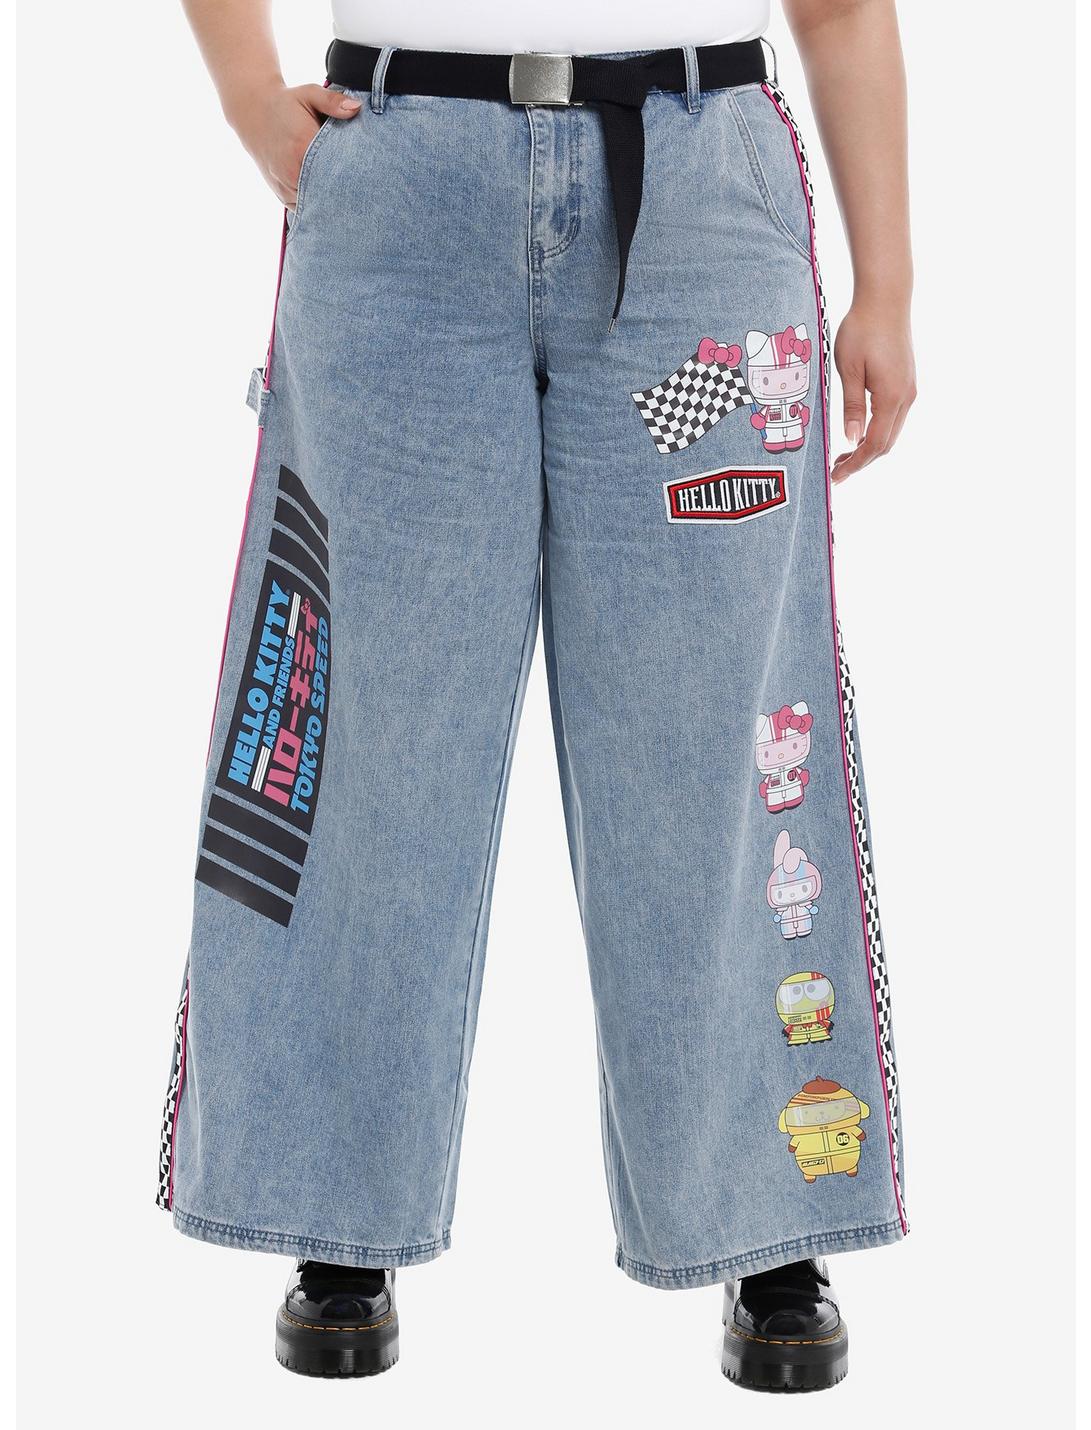 Hello Kitty And Friends Racing Team Wide Leg Girls Jeans Plus Size, MULTI, hi-res